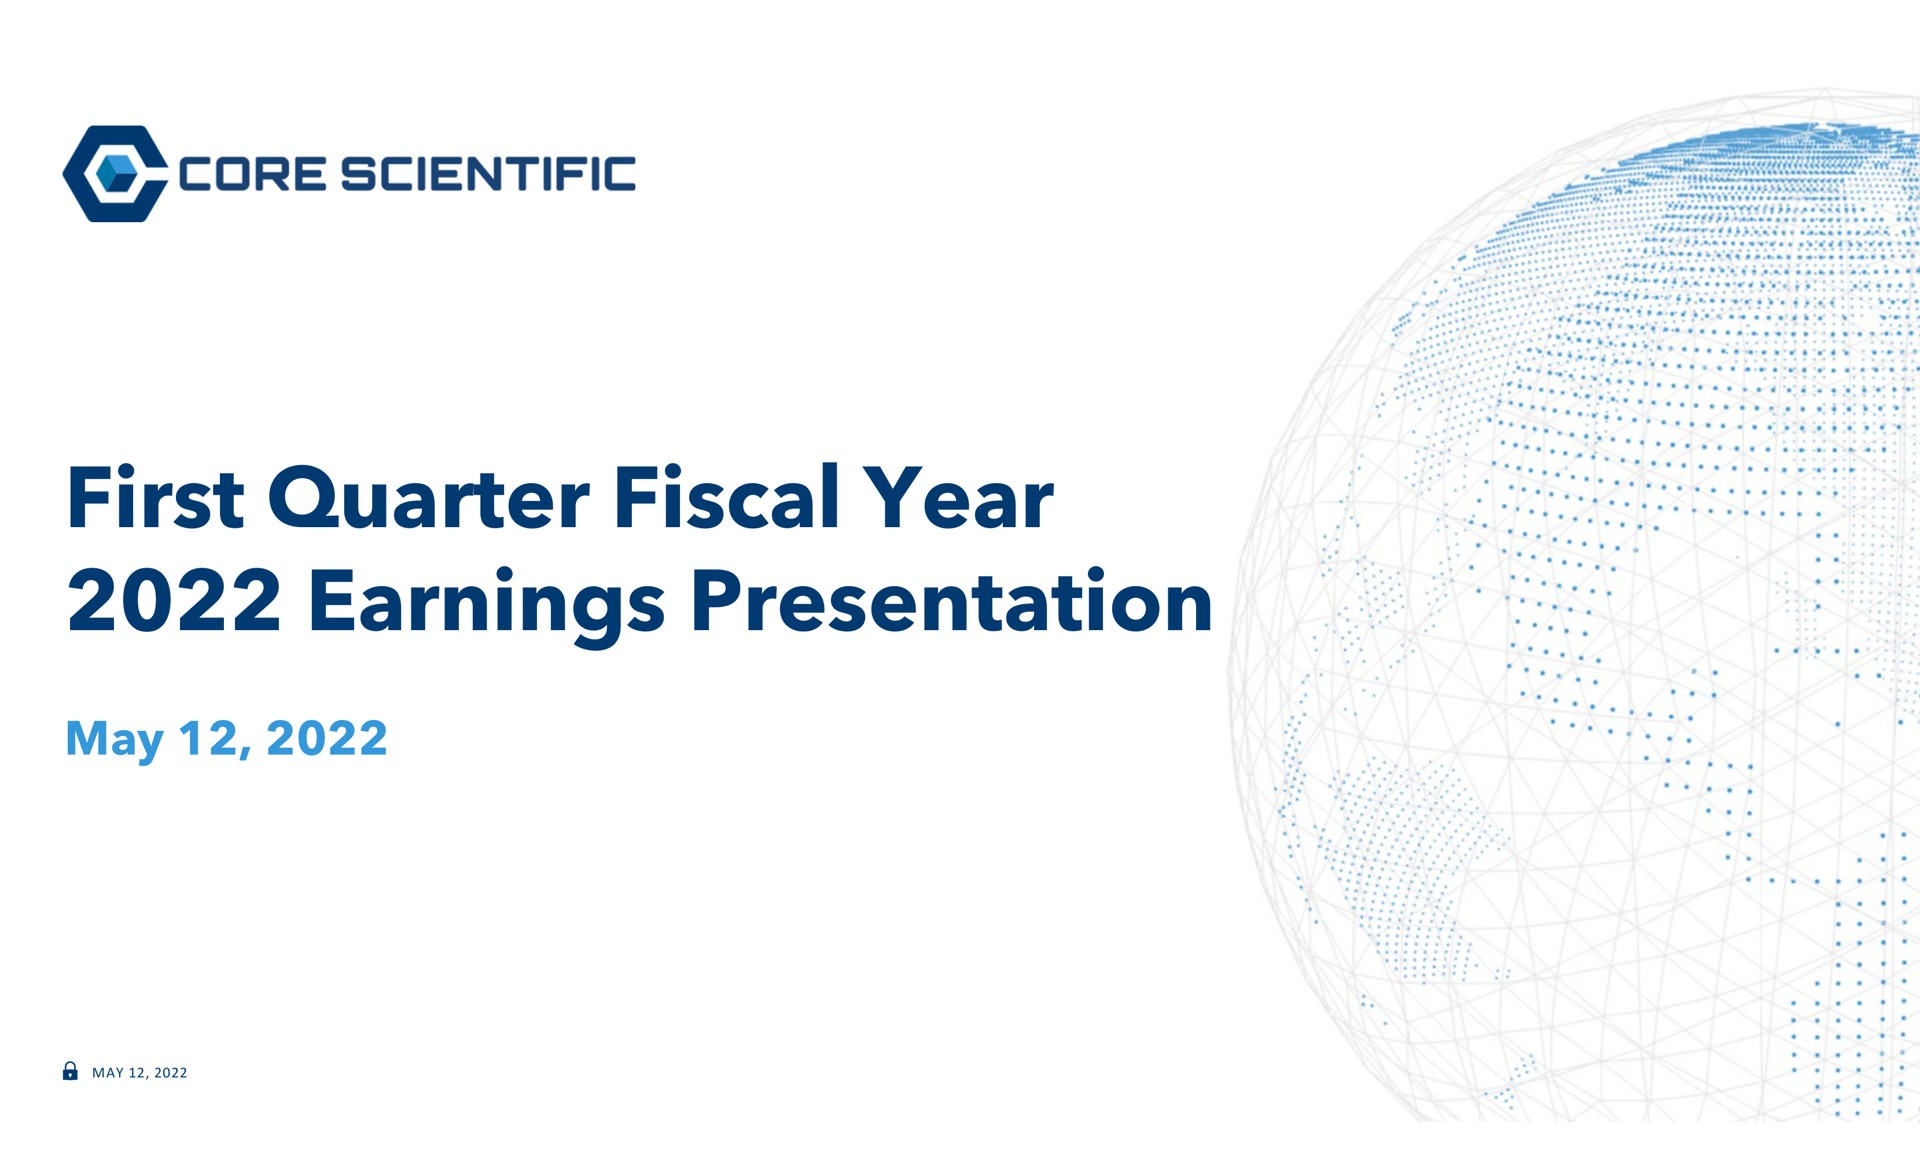 first quarter fiscal year earnings presentation pate | Core Scientific